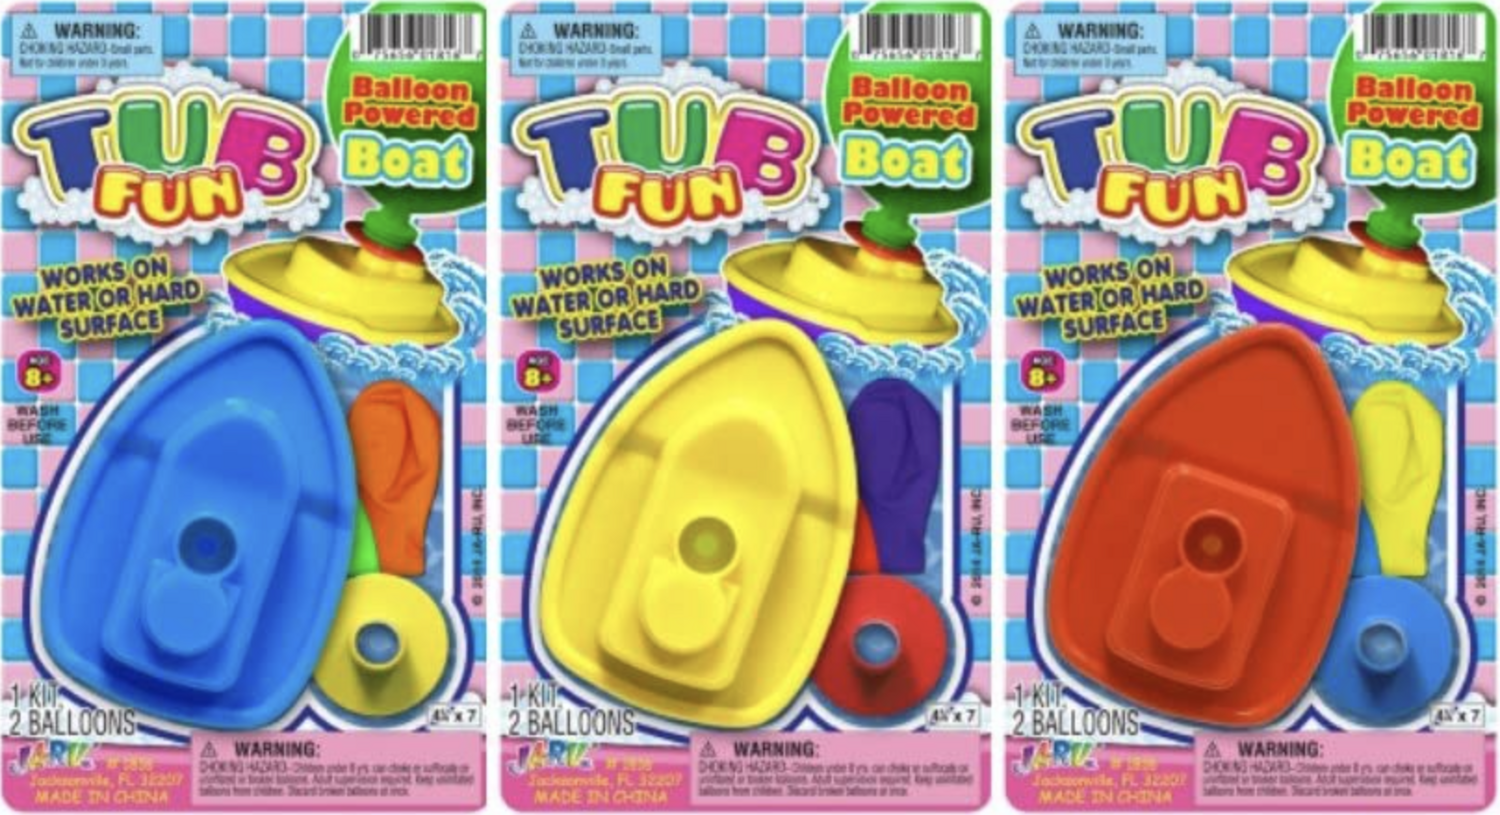 $2.99 TOY MIX /  TUB FUN POWERED BOAT / 1748-1816